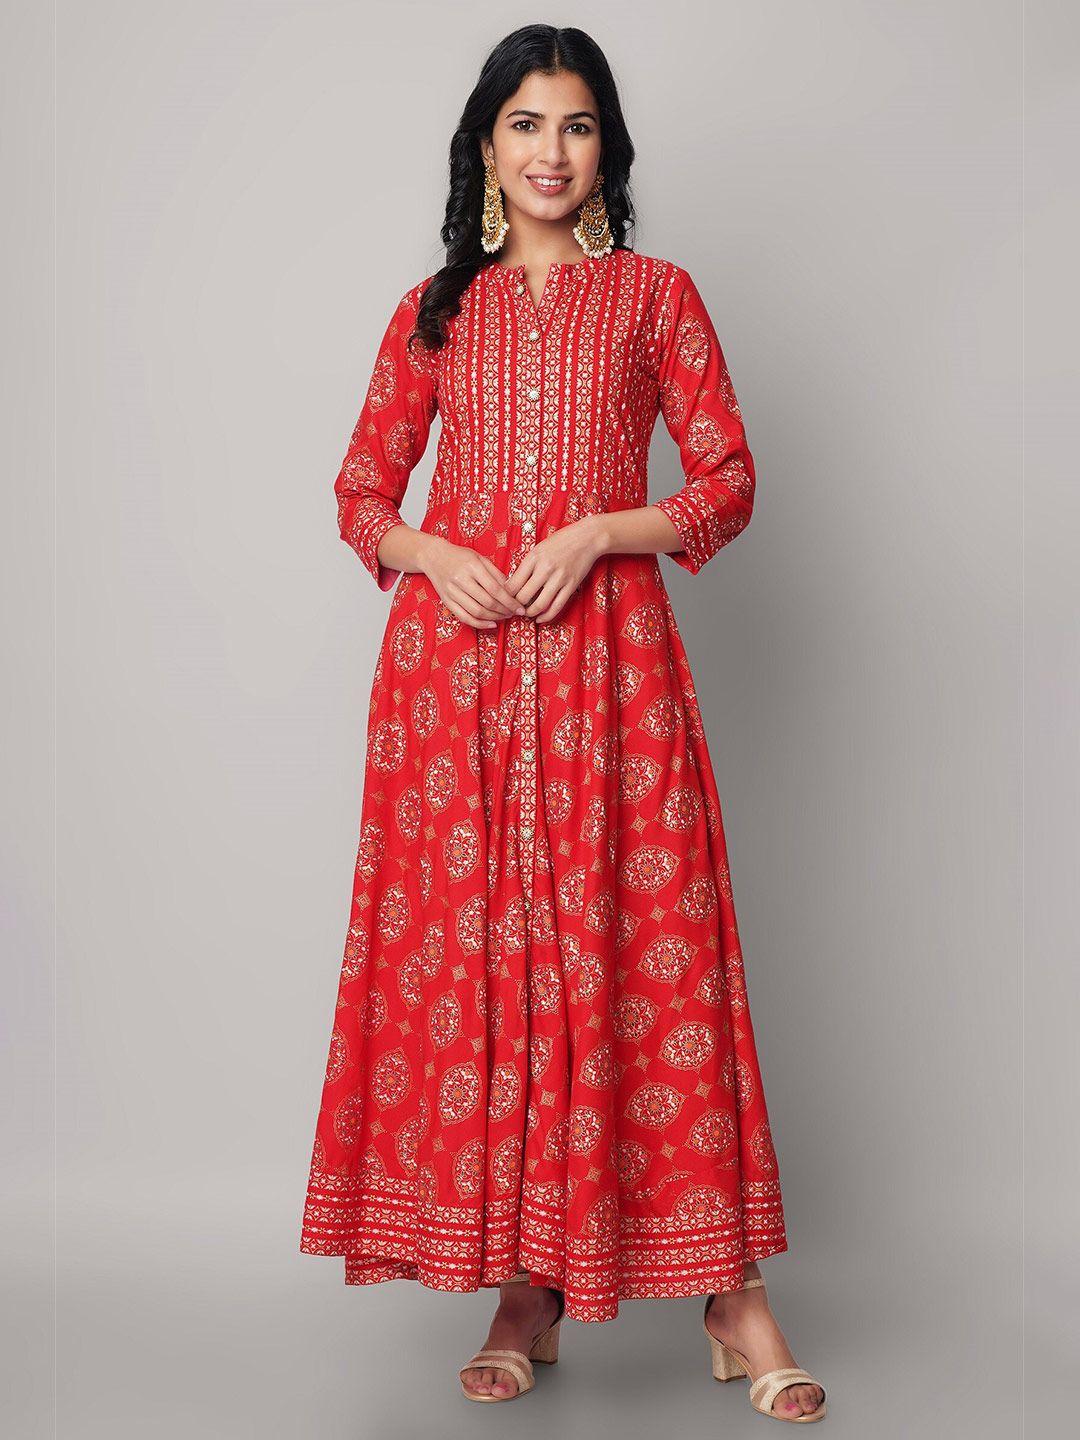 god bless red & gold-toned ethnic motifs printed rayon ethnic maxi dress